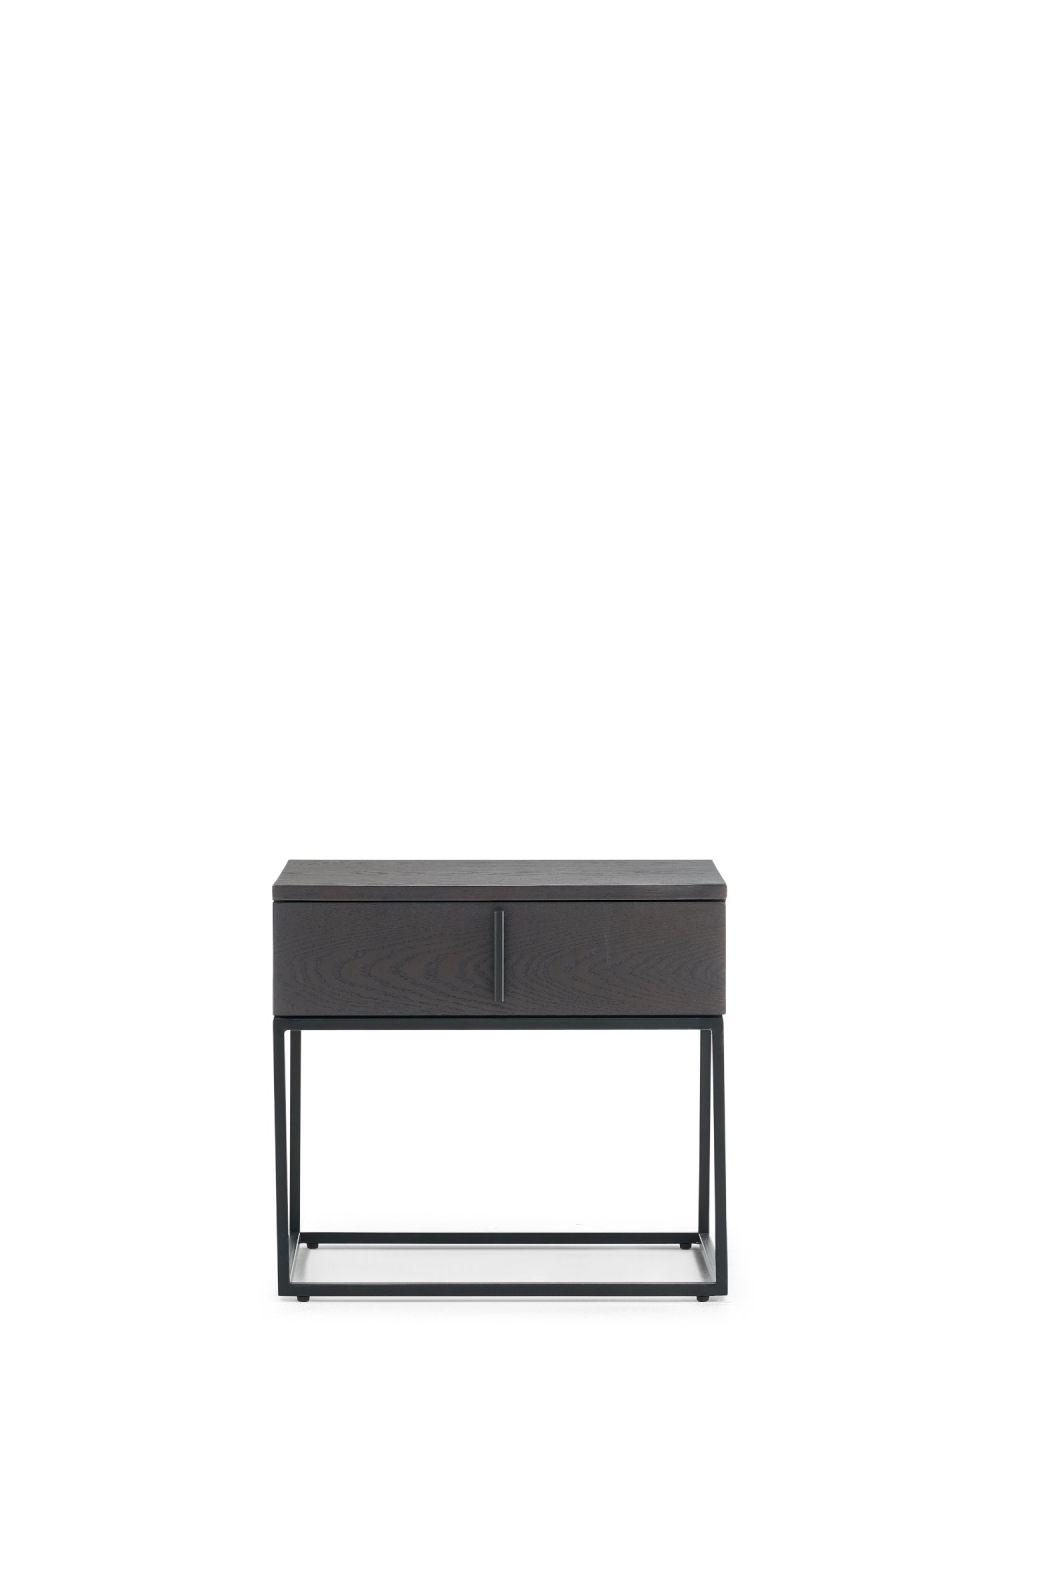 S-Ctg028 Best Selling Wooden Night Stand, Latest Modern Design Bedroom Set in Hoe and Hotel